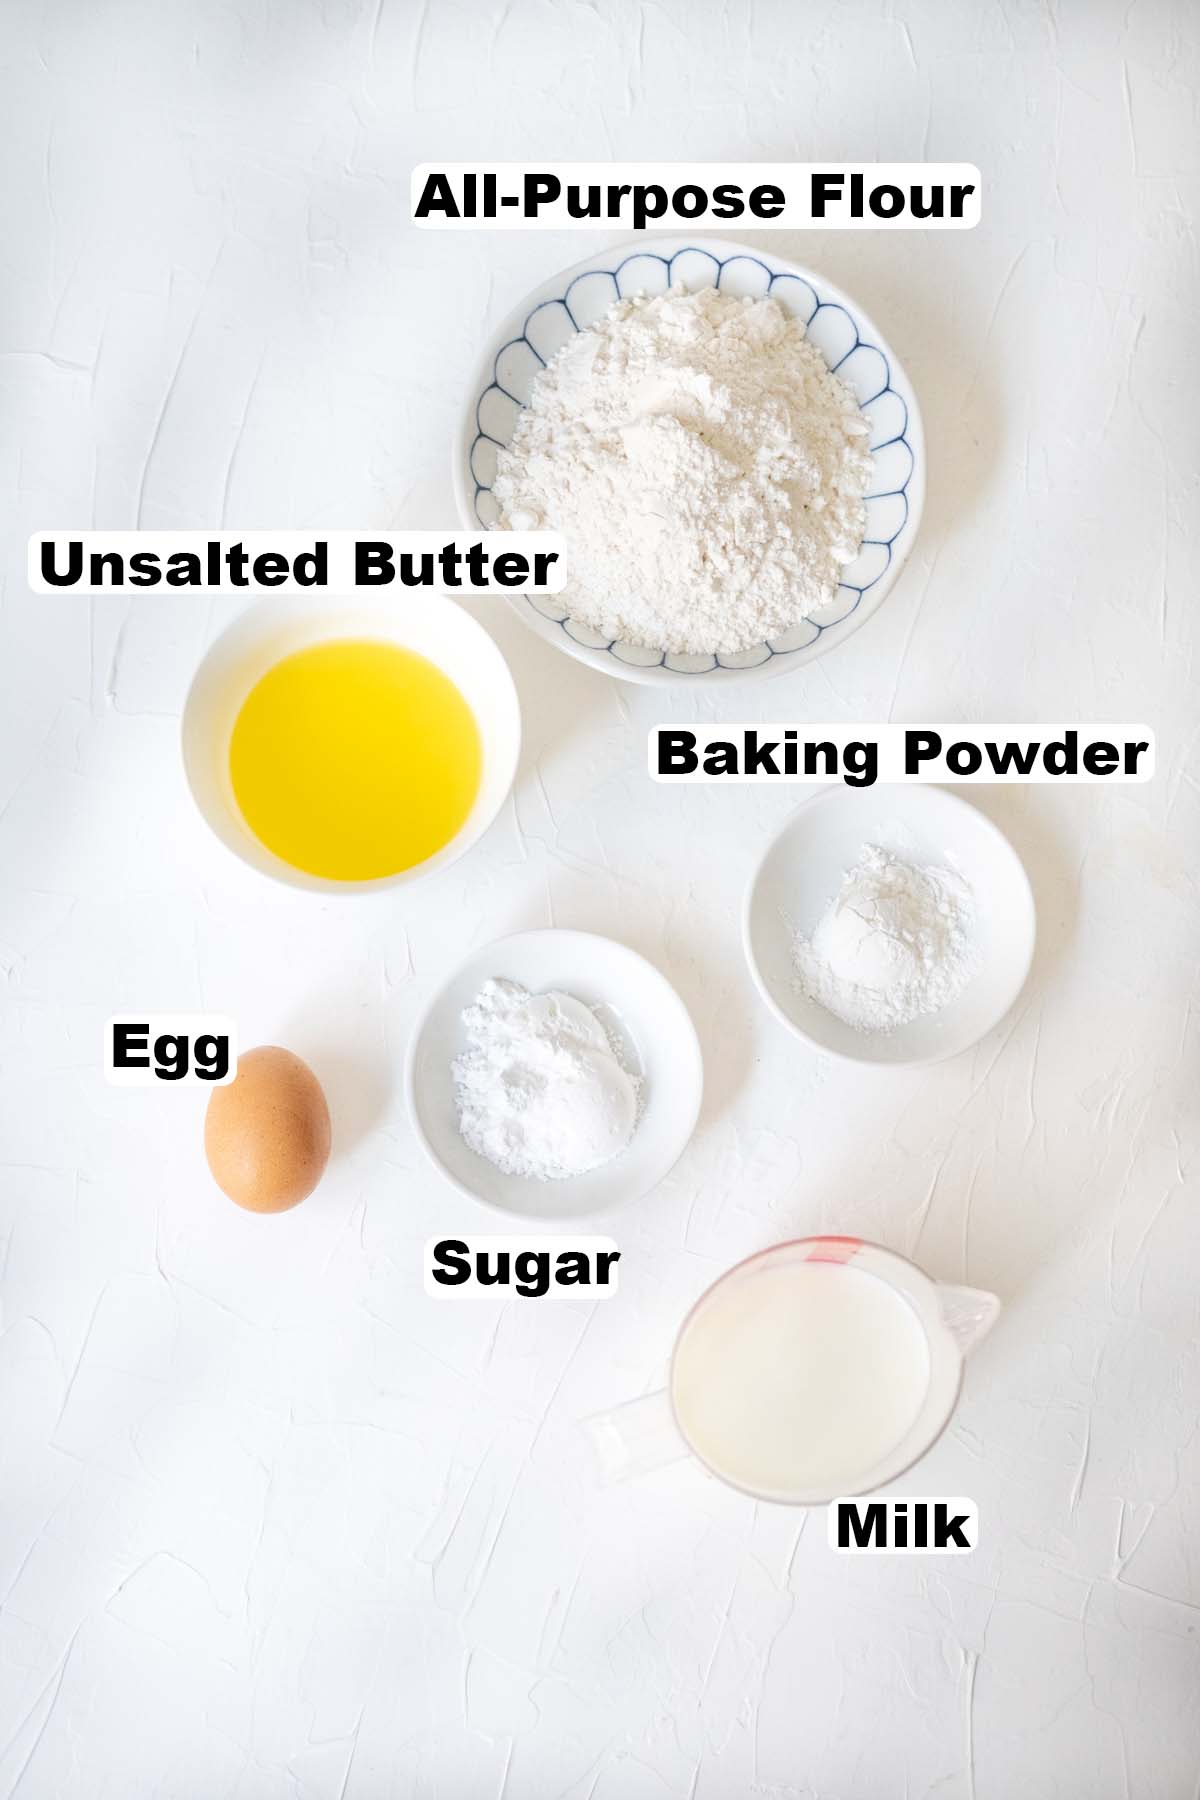 Ingredients for fluffy pancakes recipe.